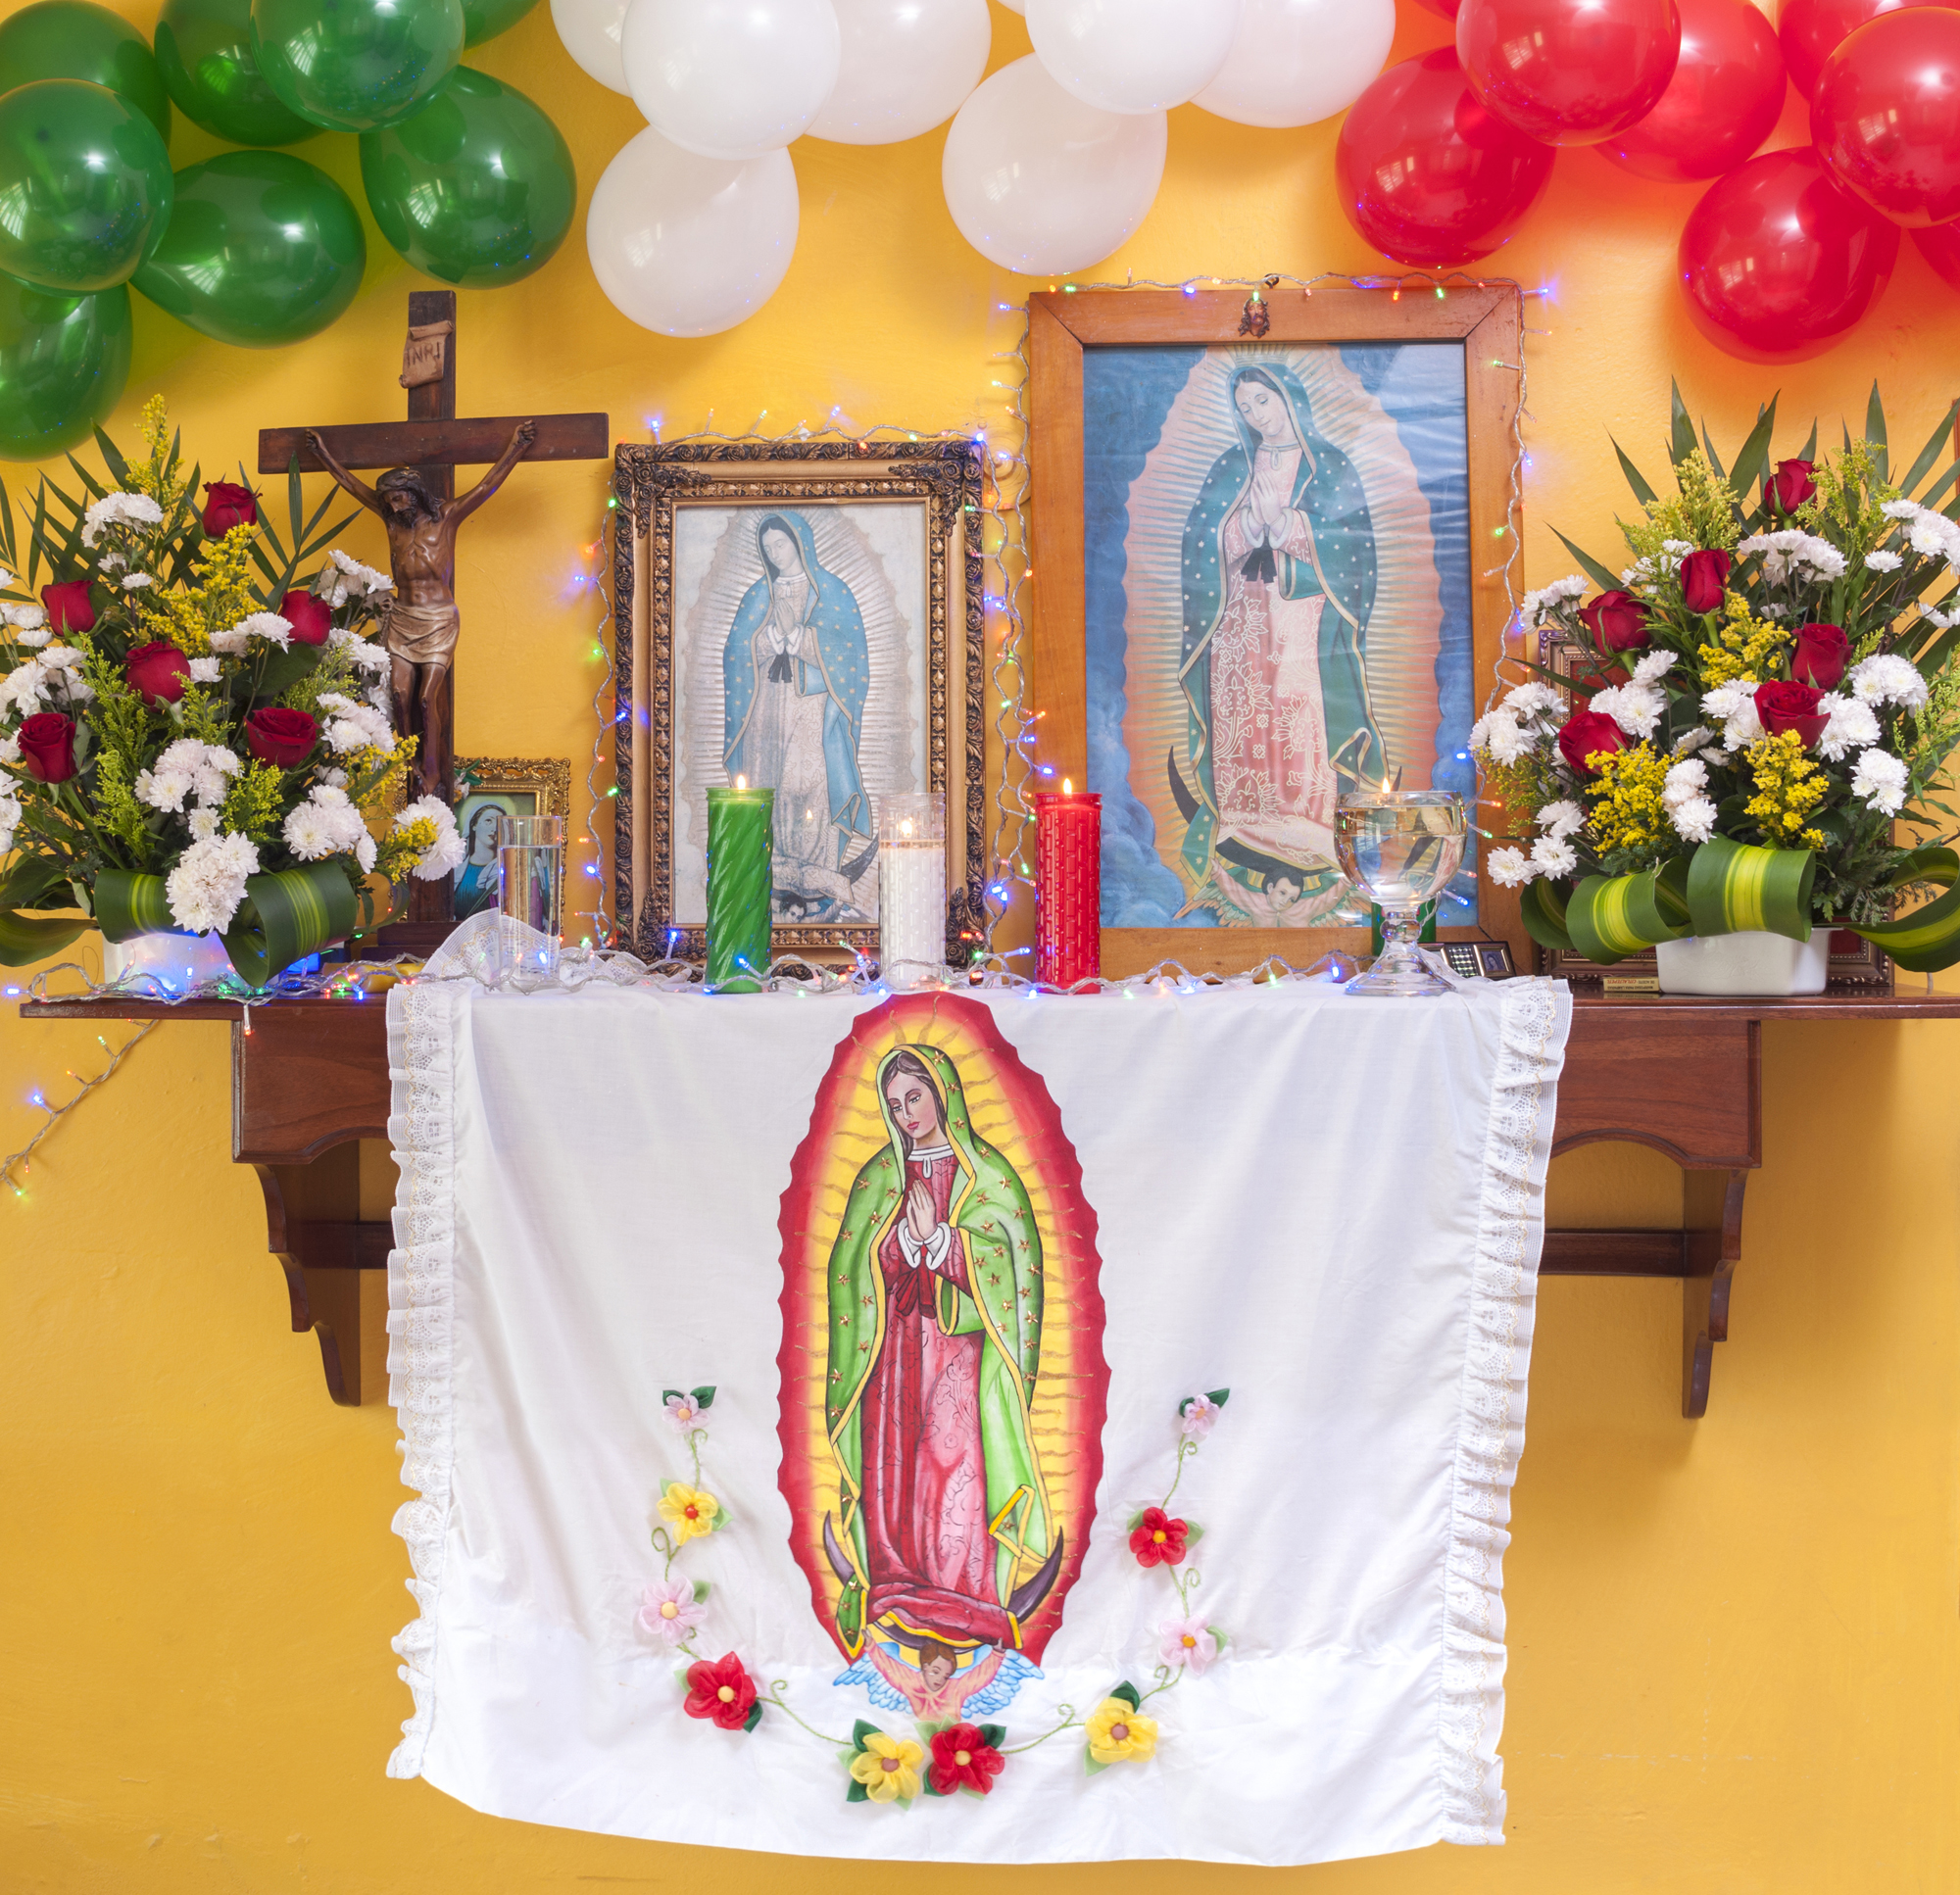 The day of “La Virgen” is an important affirmation of cultural and religious identity for many Mexican-Americans